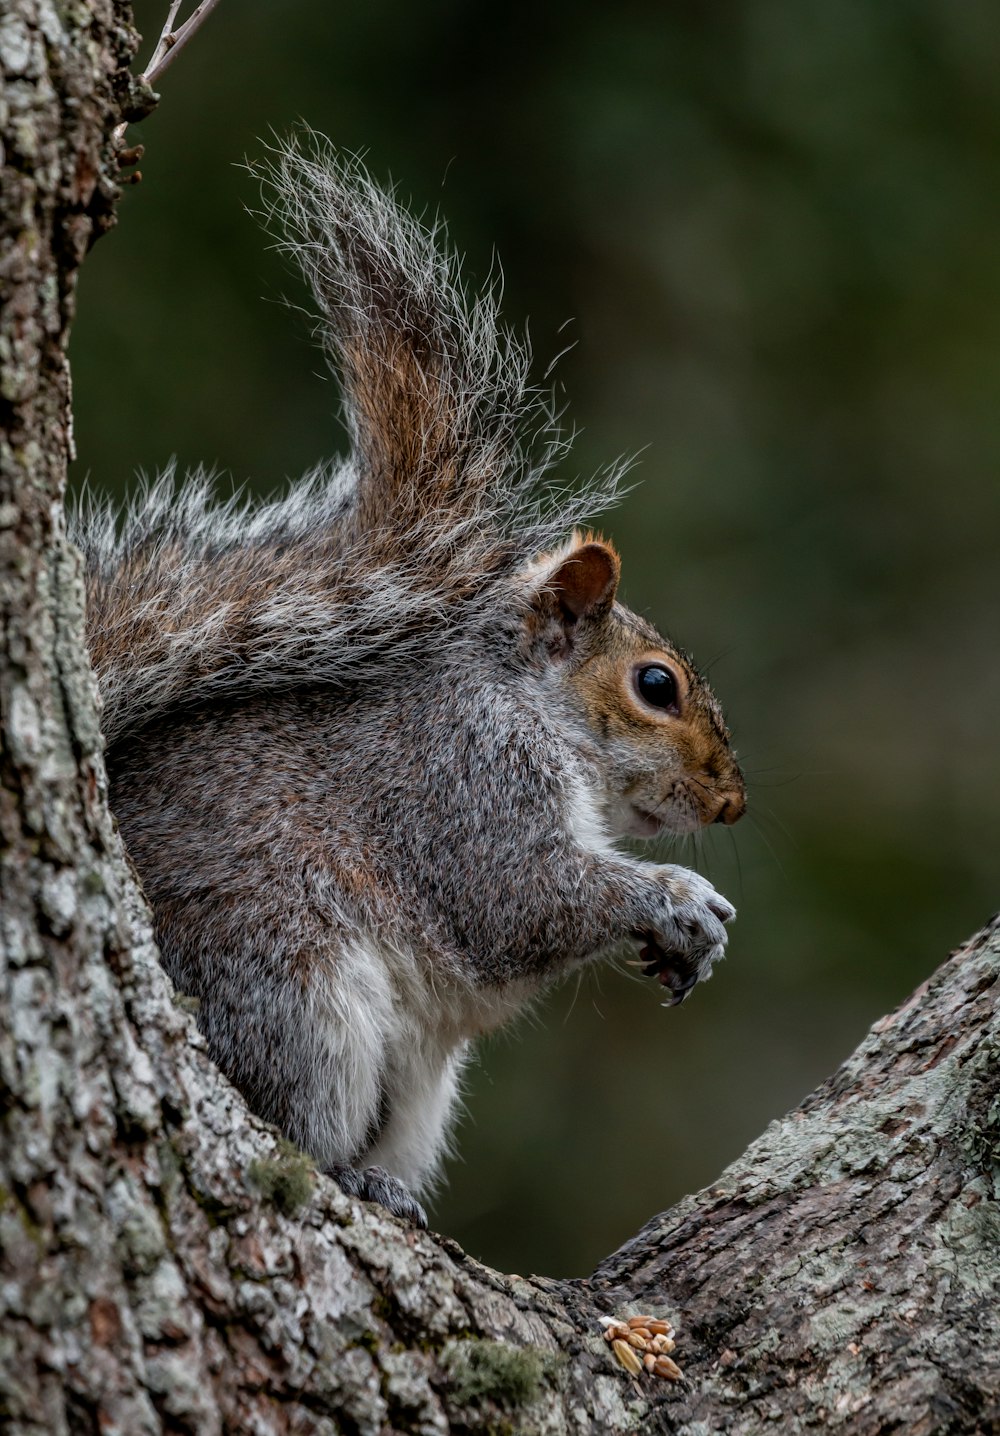 gray and brown squirrel on tree branch during daytime